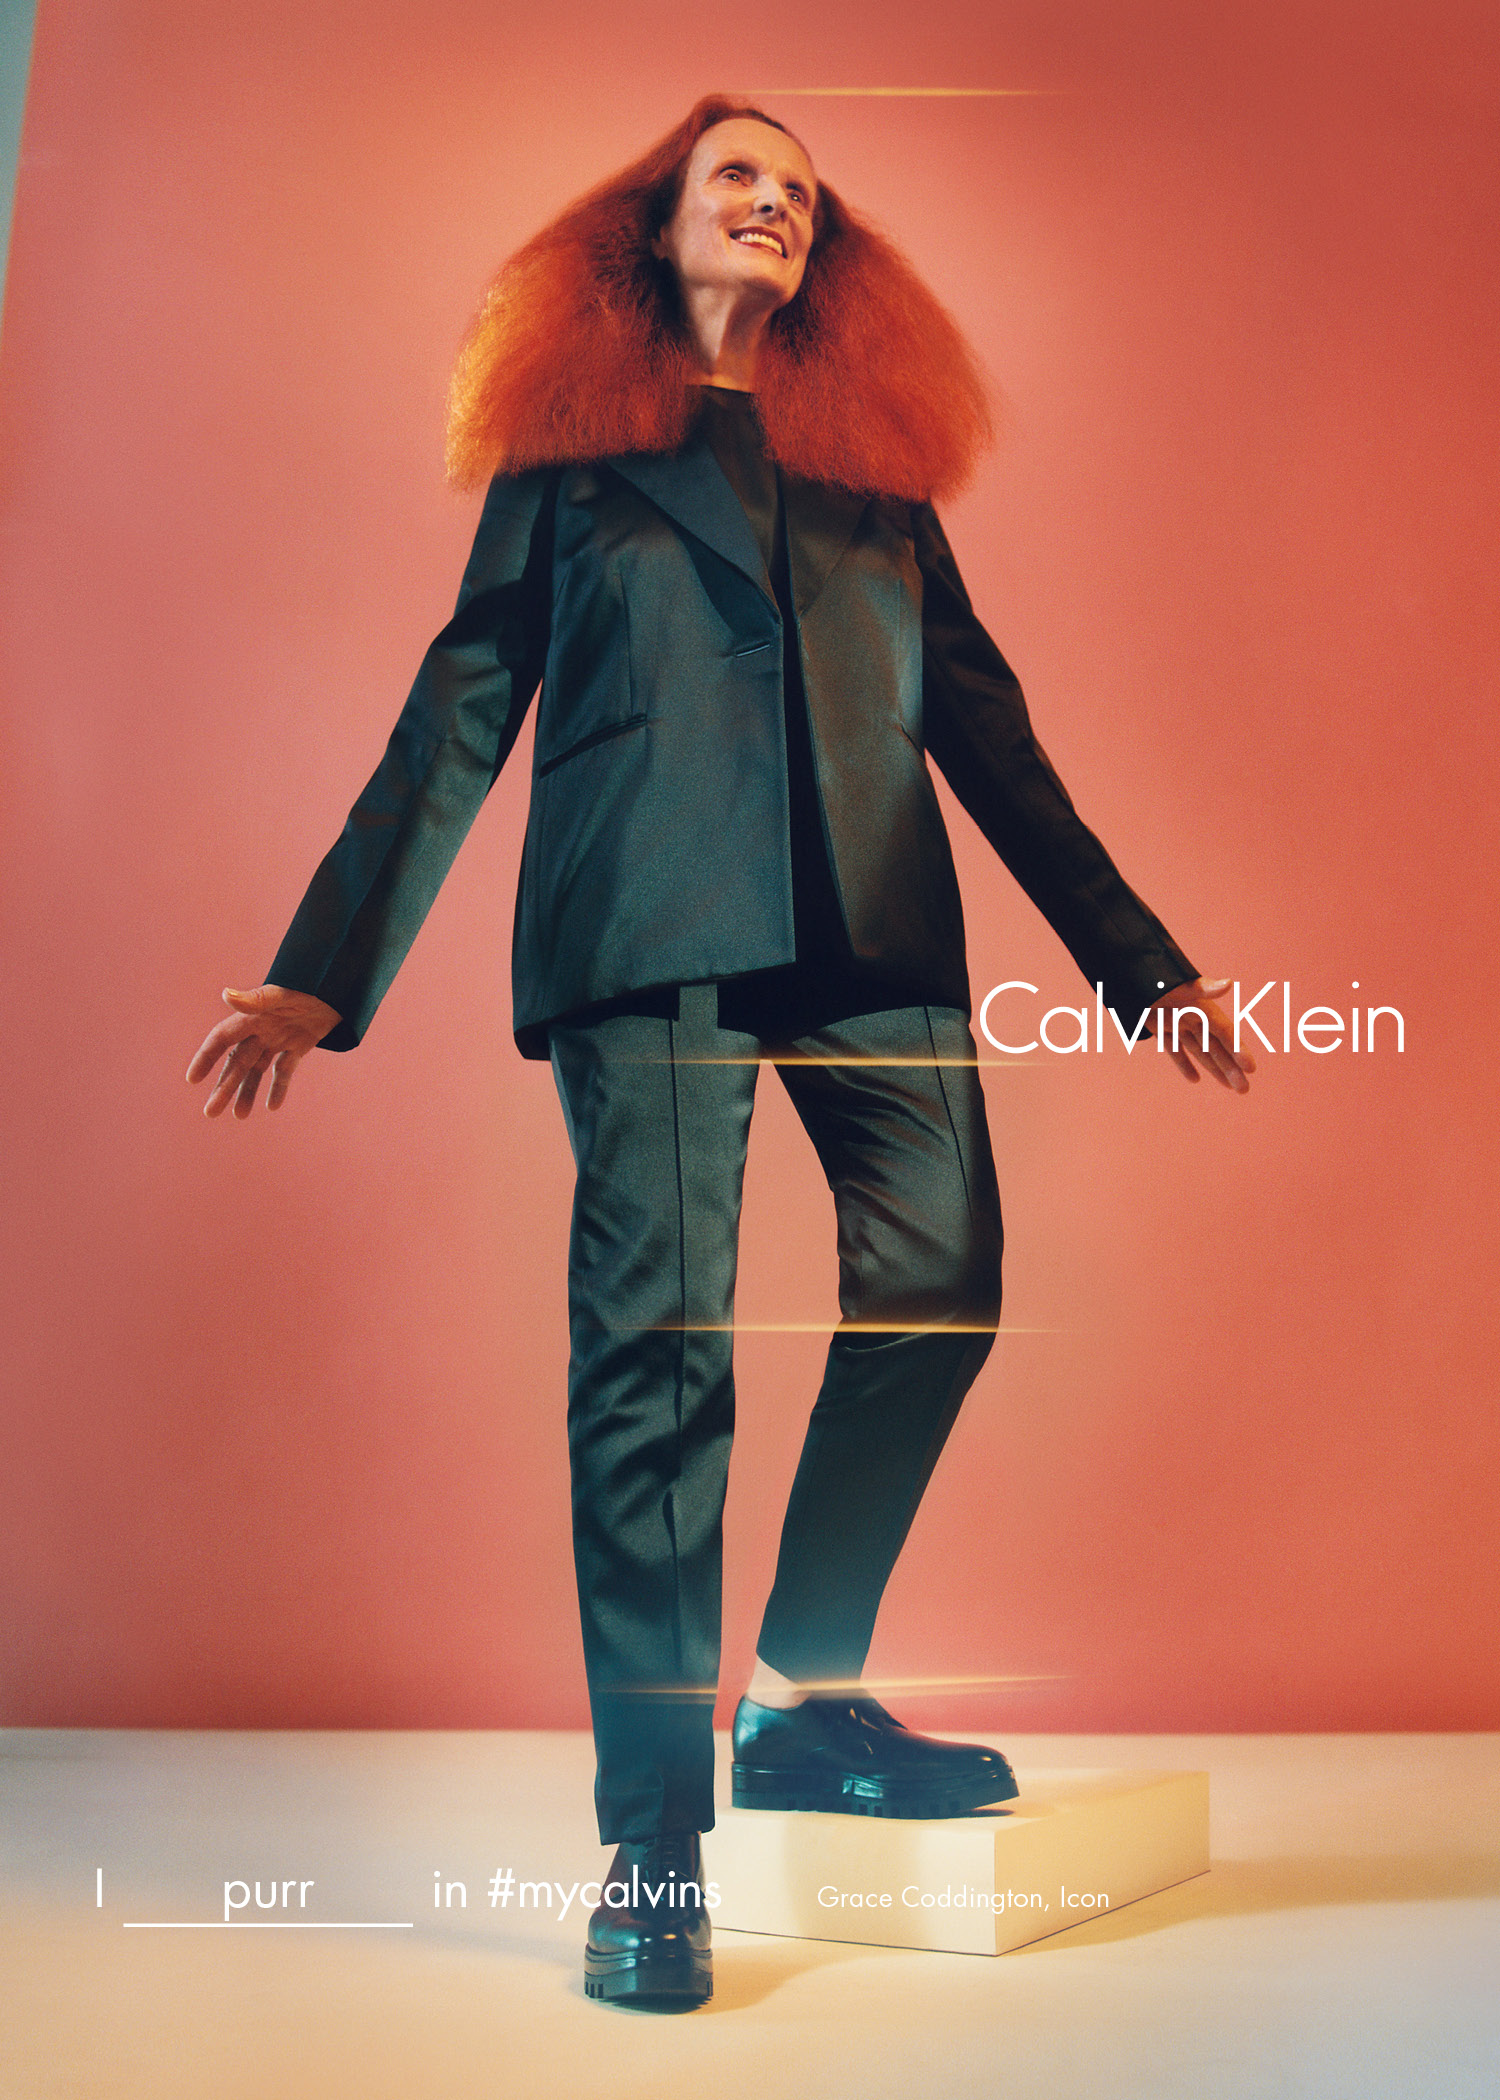 Calvin Klein's Fall 2016 Ad Campaign Featuring Grace Coddington, Young  Thug, Kate Moss, Bella Hadid and more - Daily Front Row